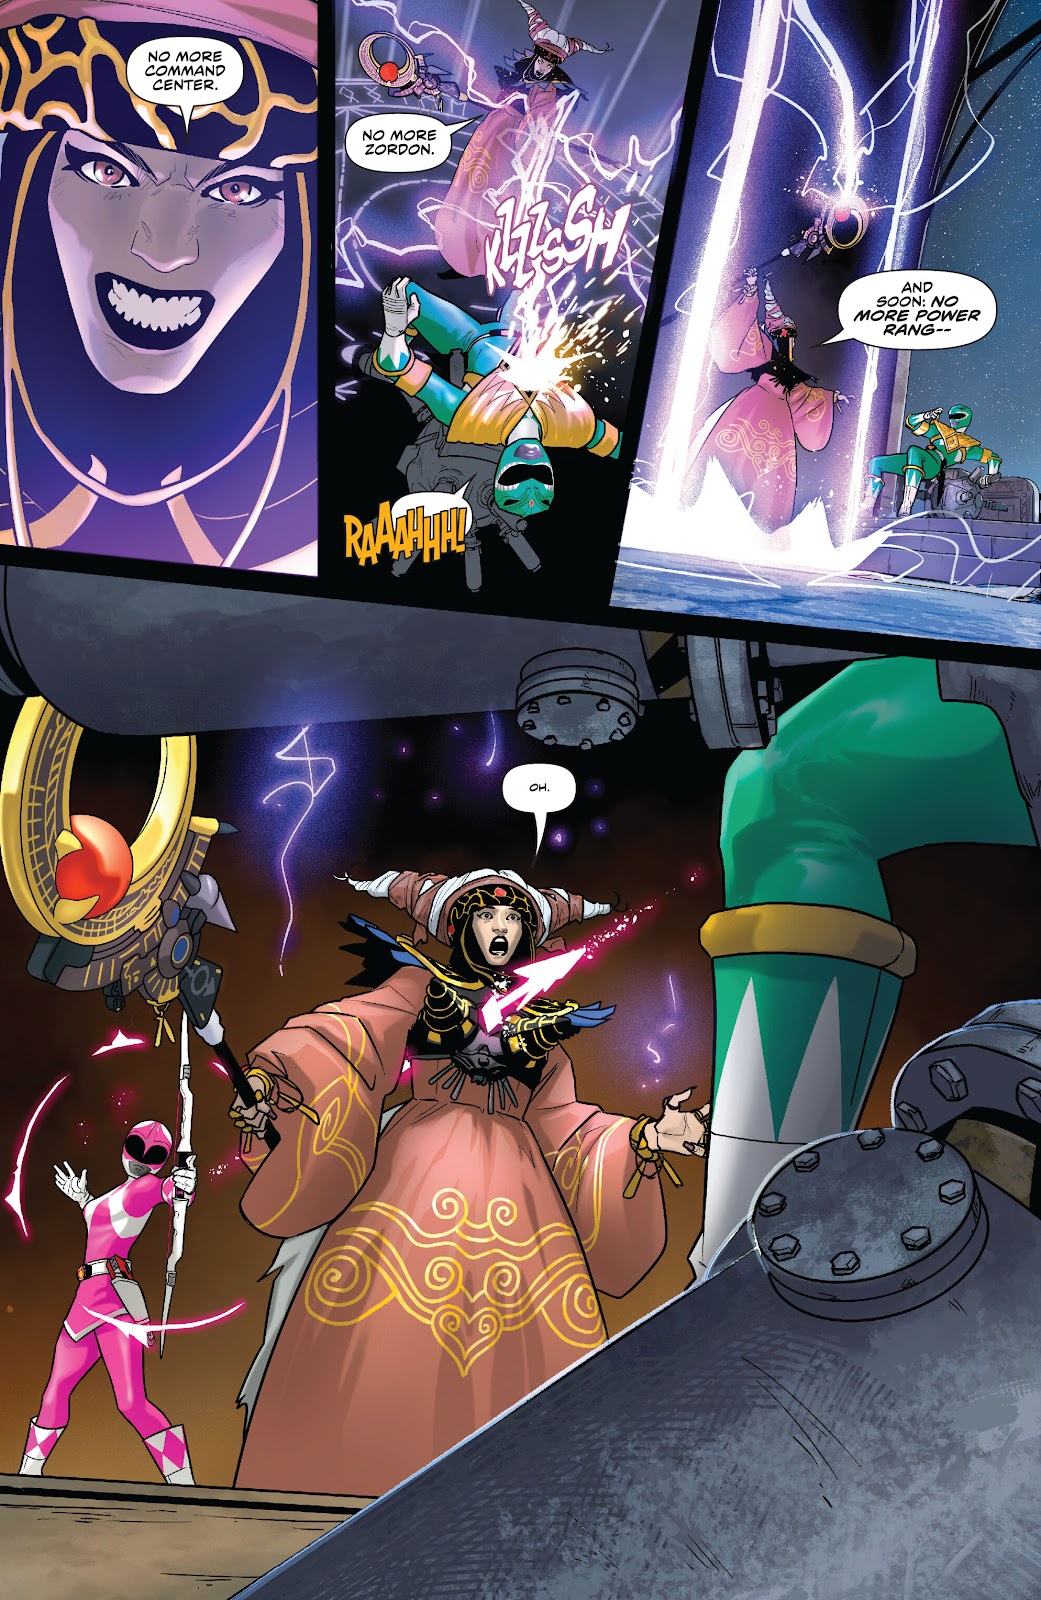 Mighty Morphin Power Rangers: The Return issue 2 - Page 9